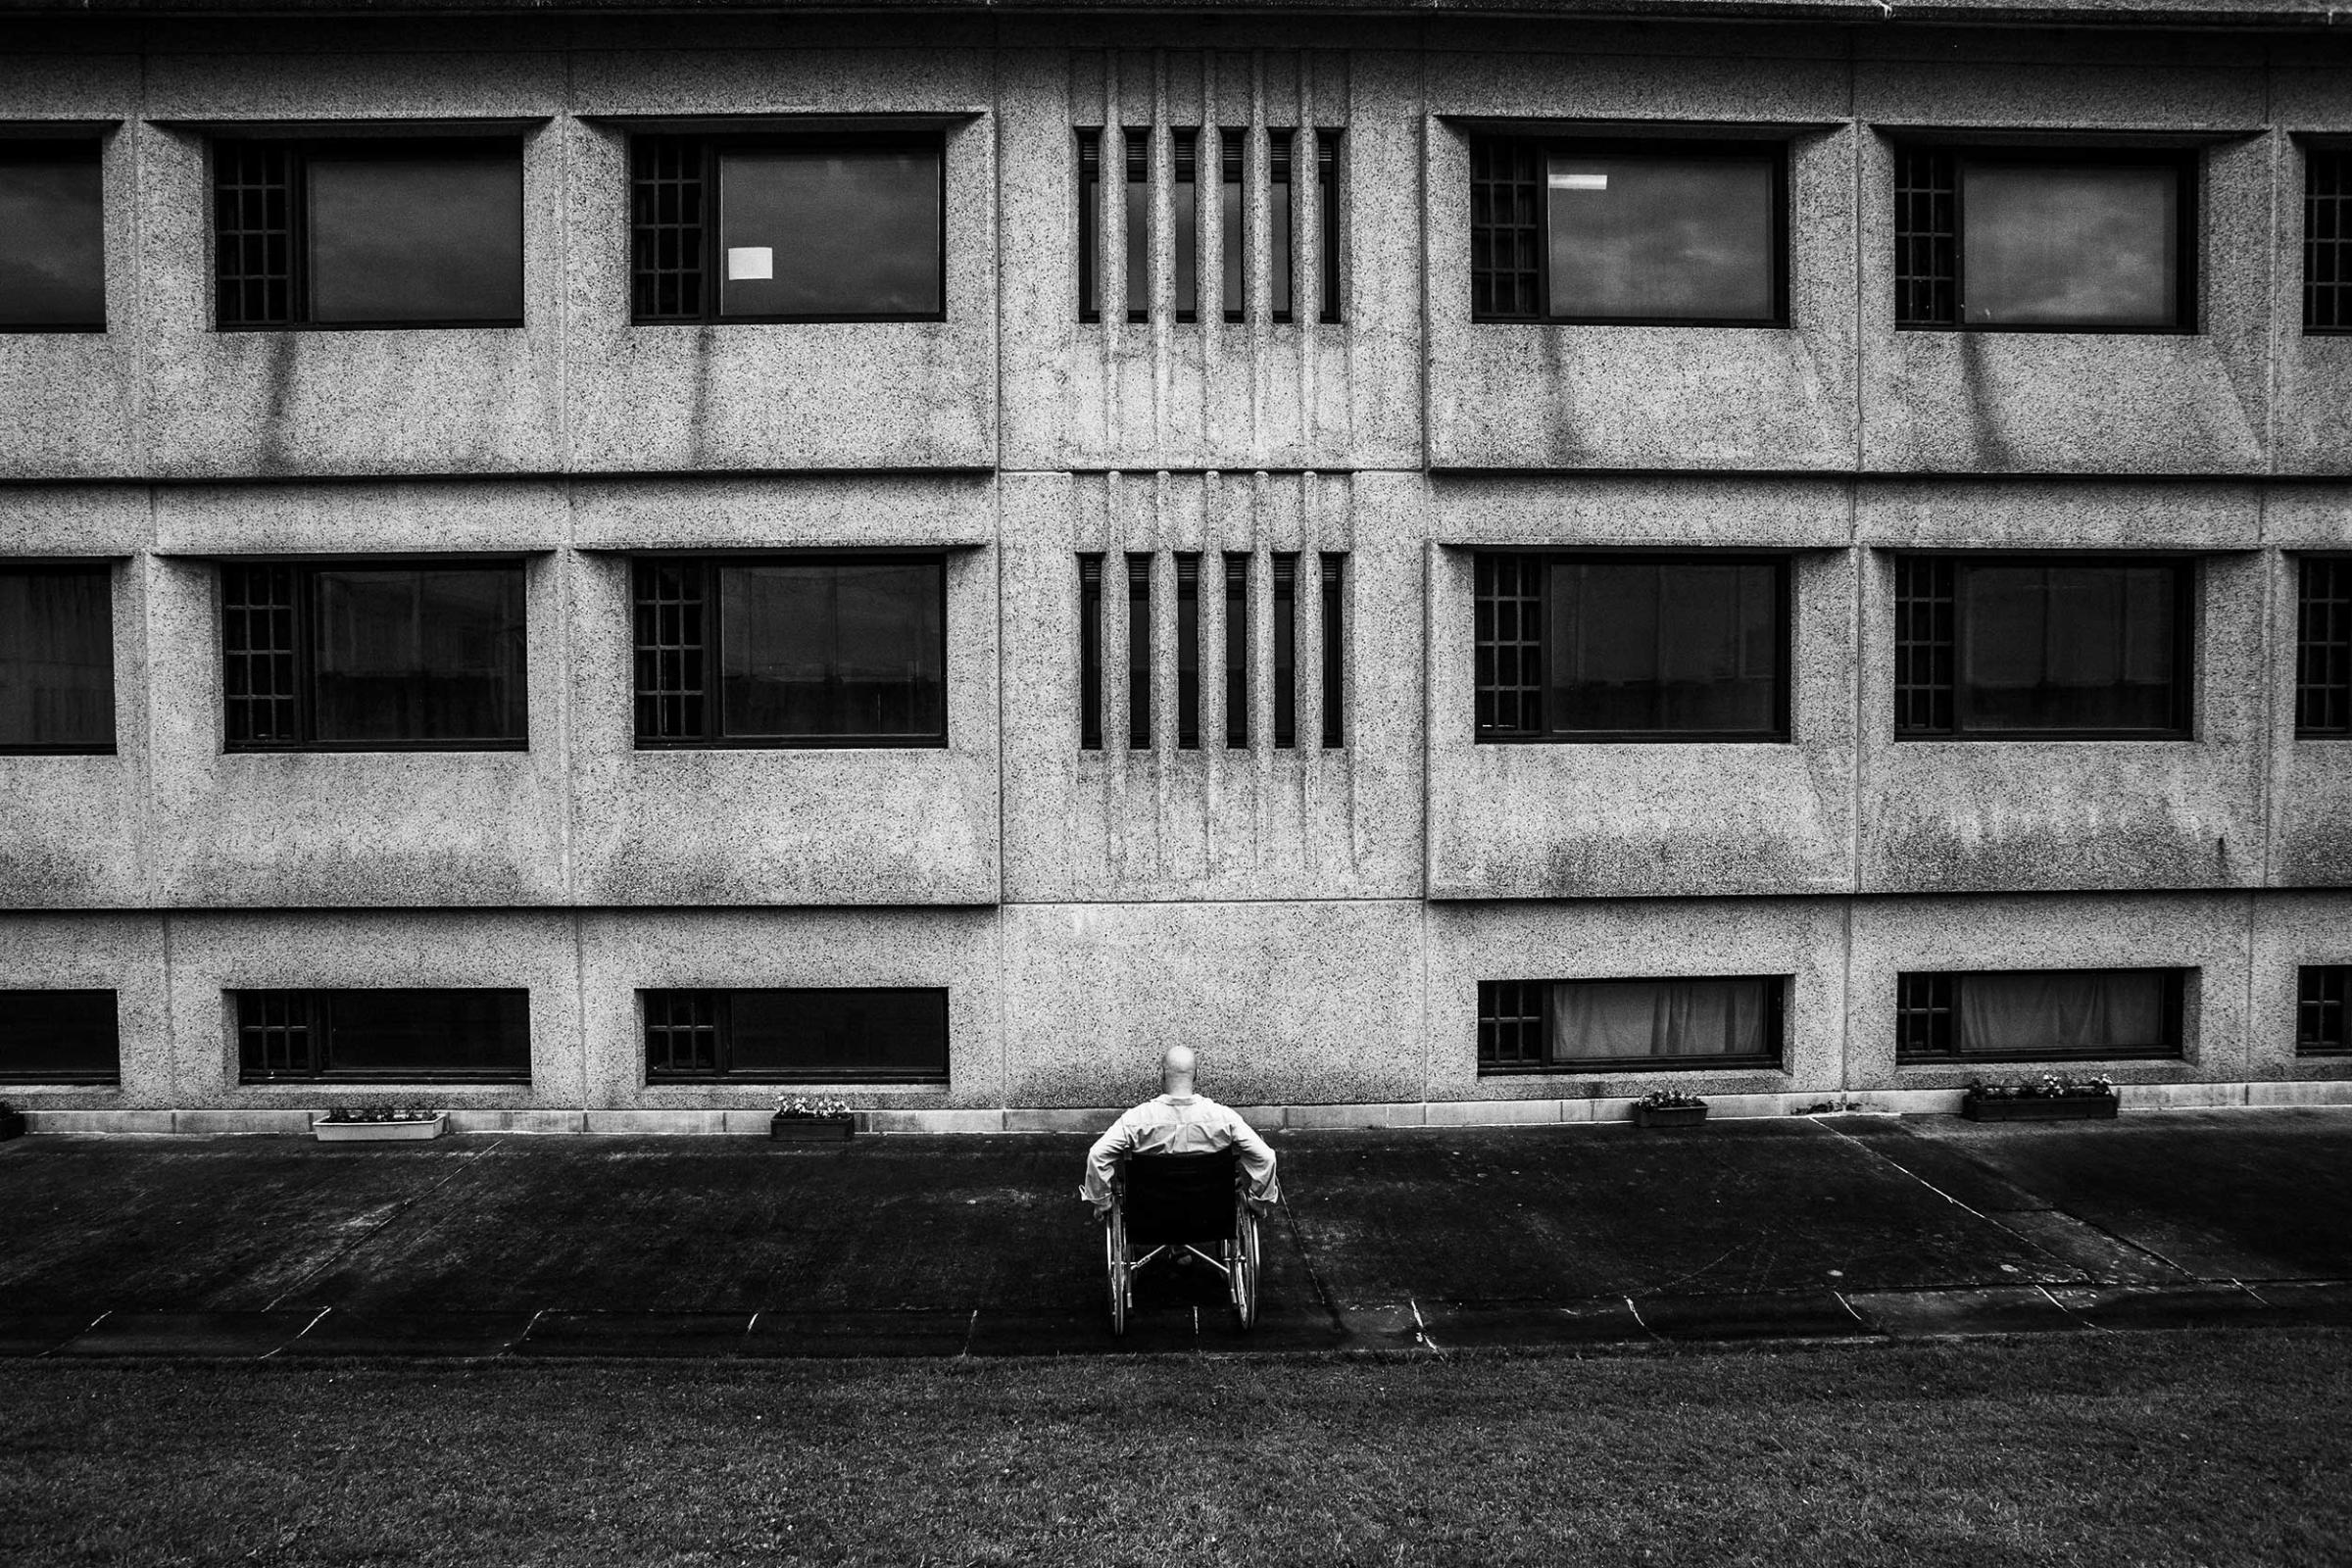 A patient in Paifve, Liège, Belgium. Due to their mental illnesses, prisoners in Paifve are called patients. July 2011.